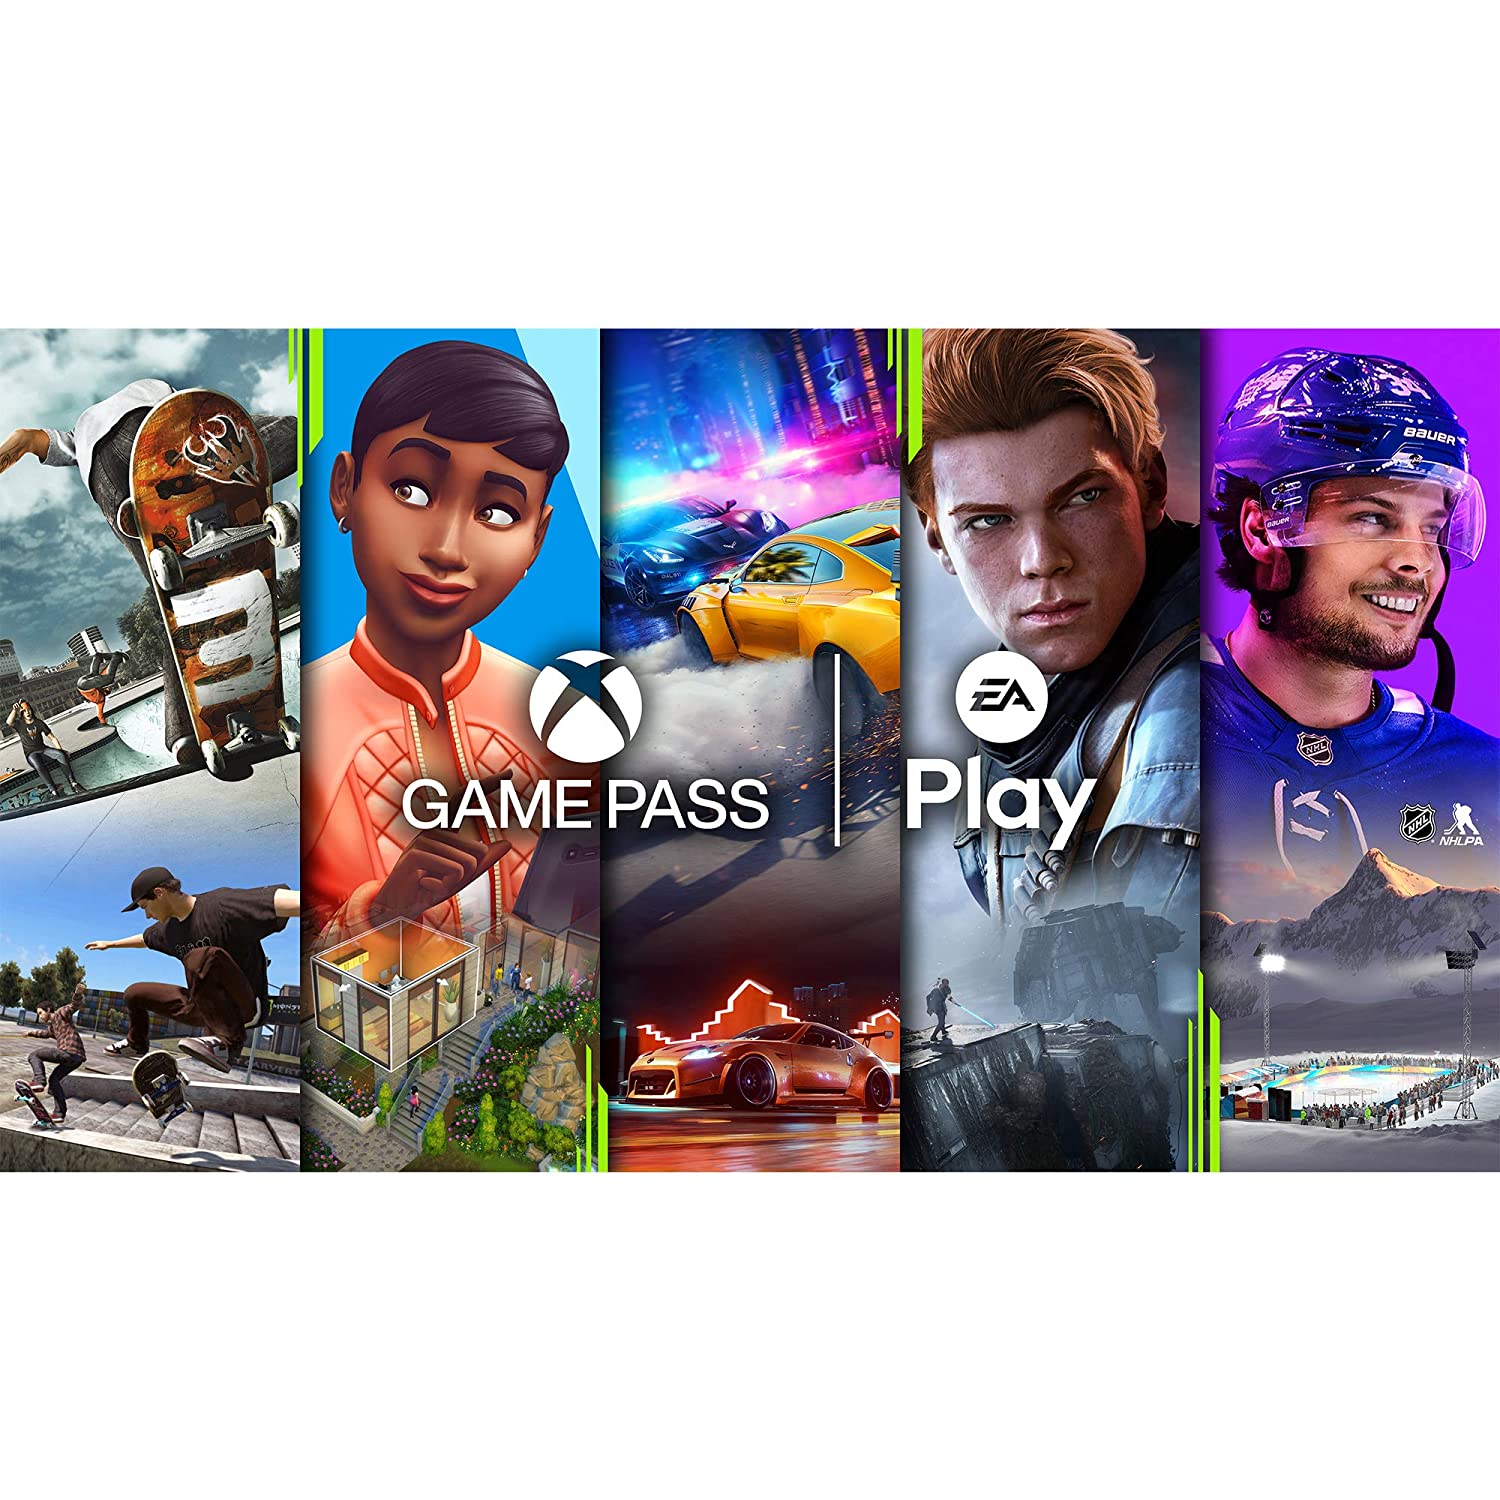 xbox game pass ultimate 12 month canada